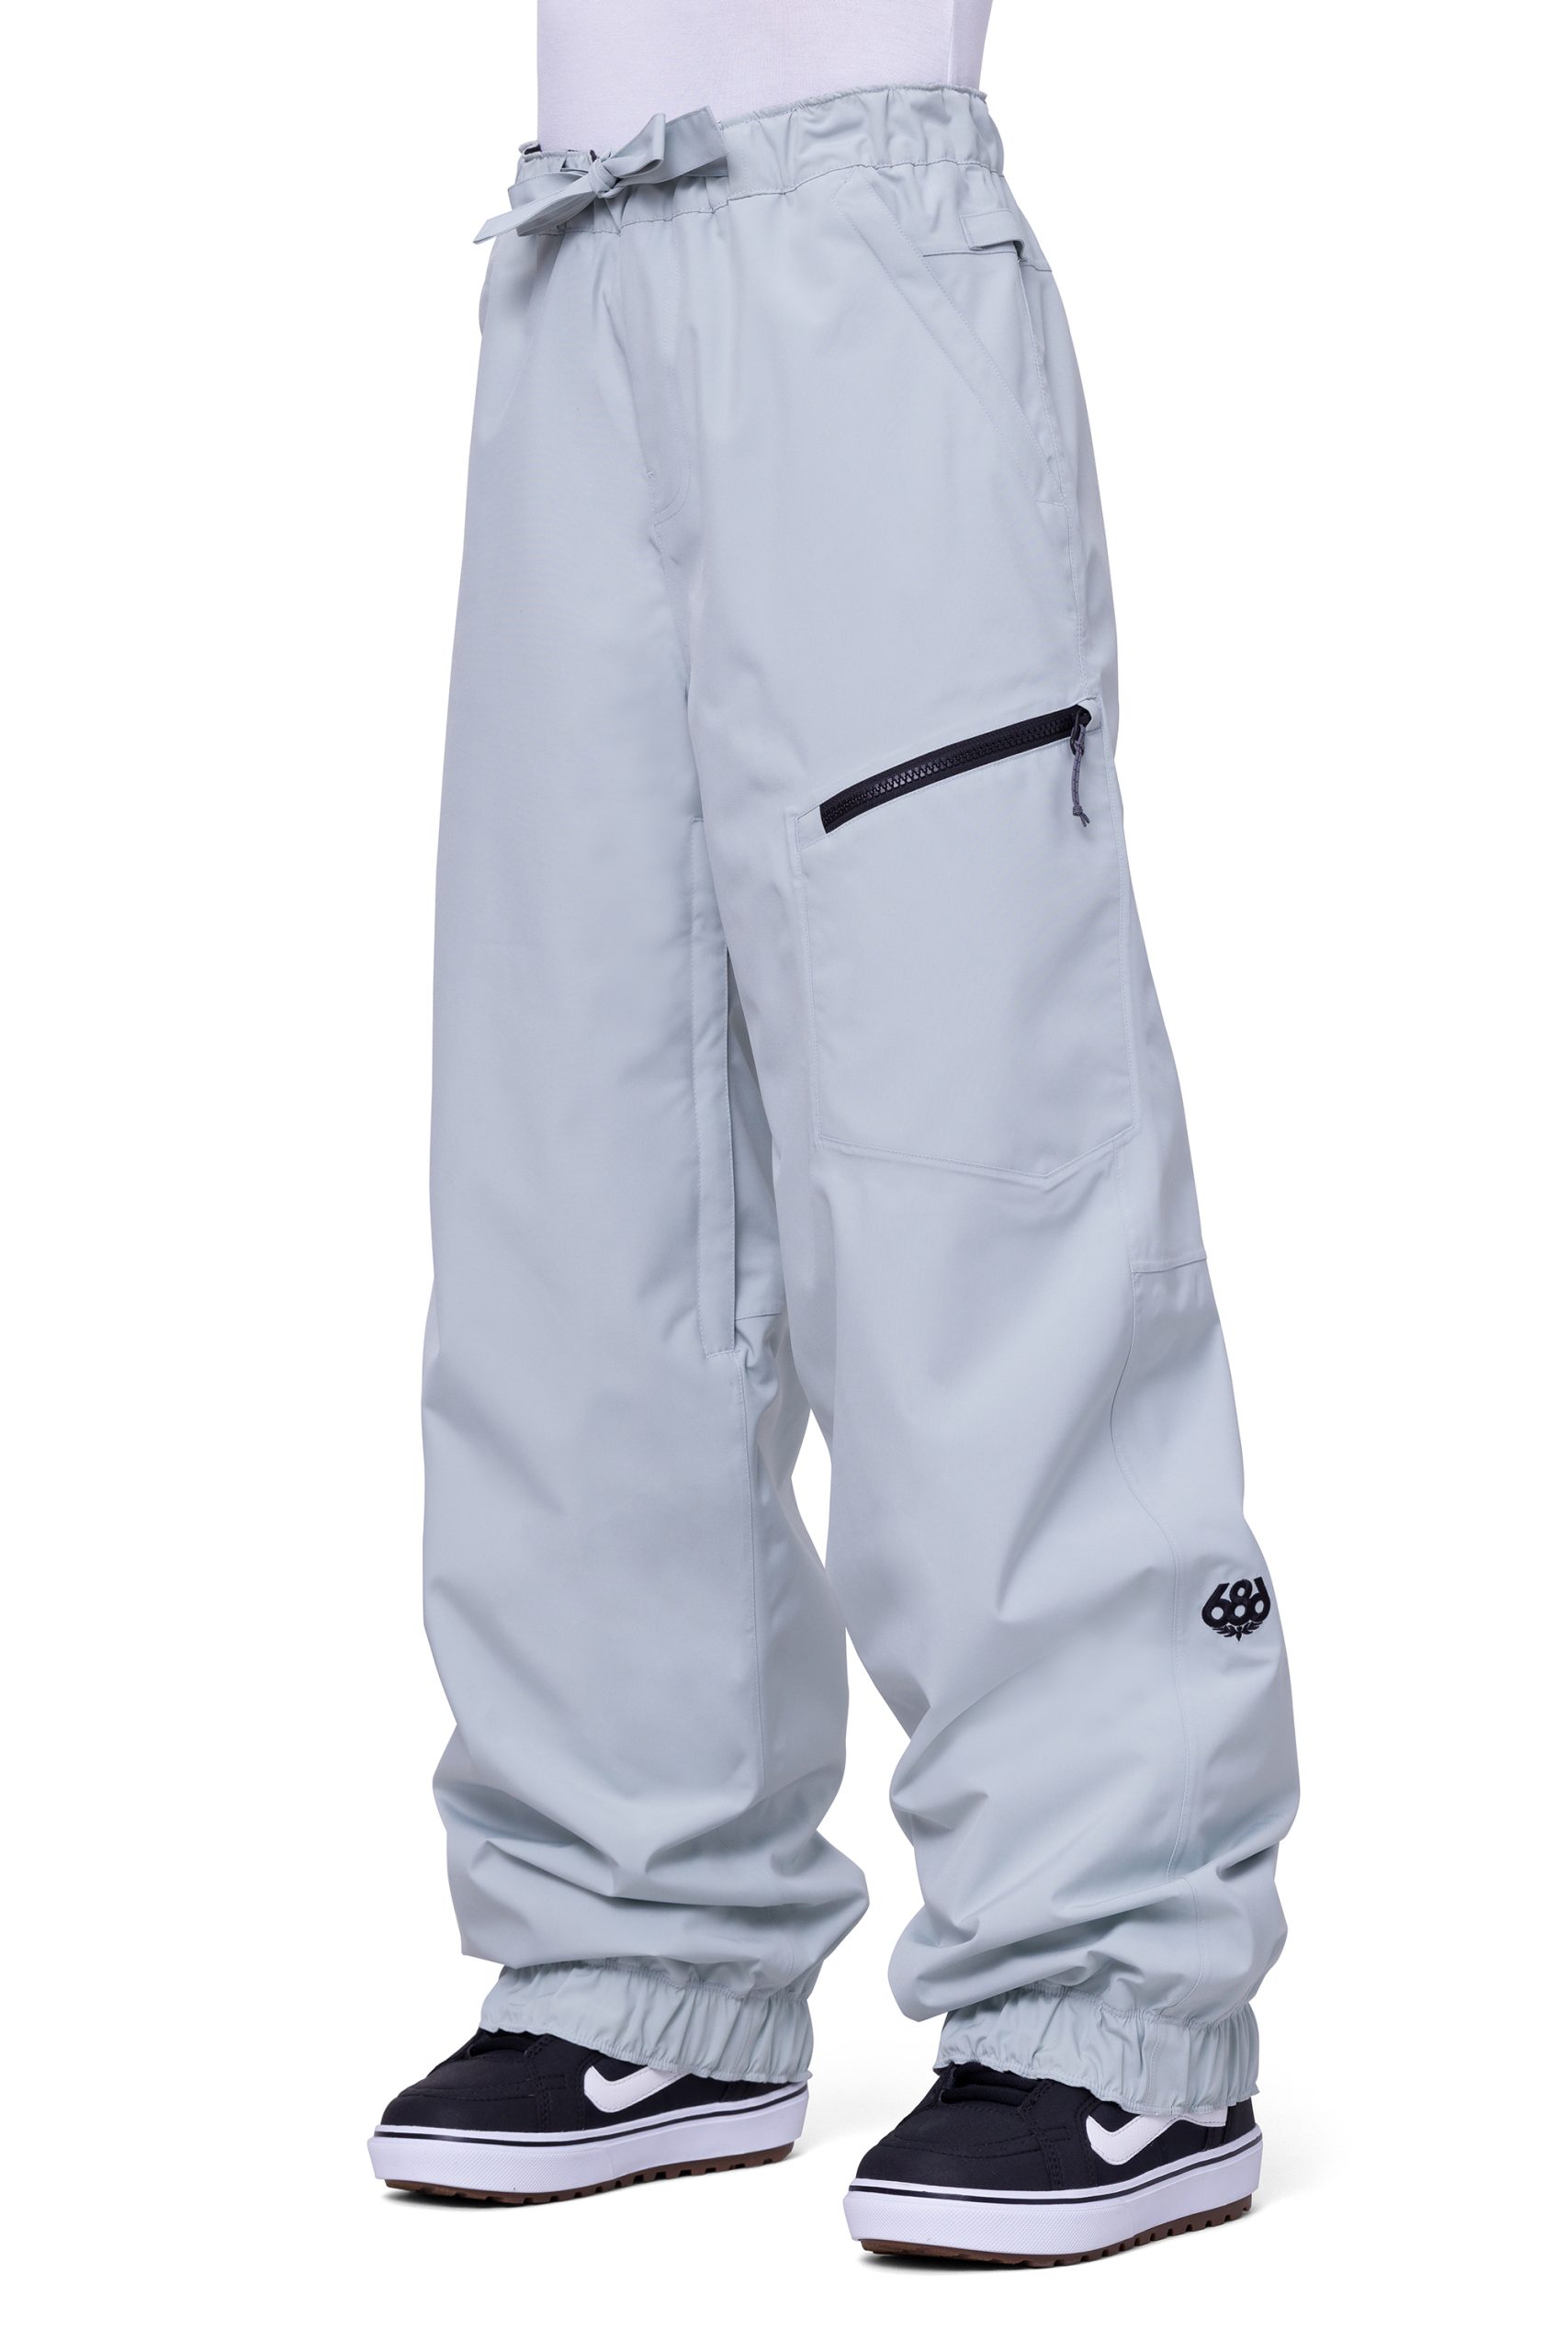 The 2.5L Ghost Pant